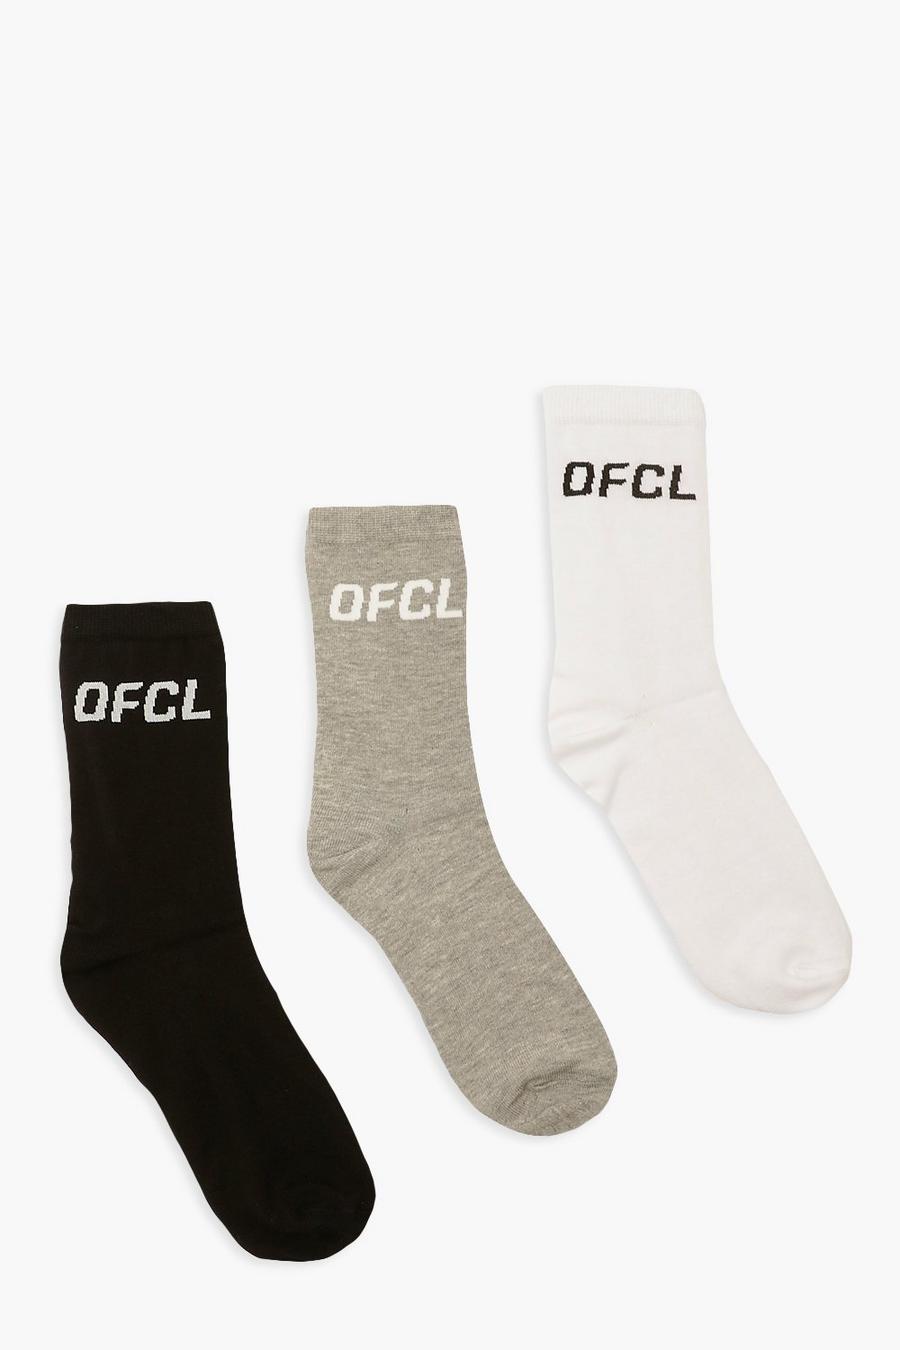 Multi Mixed 3 Pack Ofcl Sports Socks image number 1